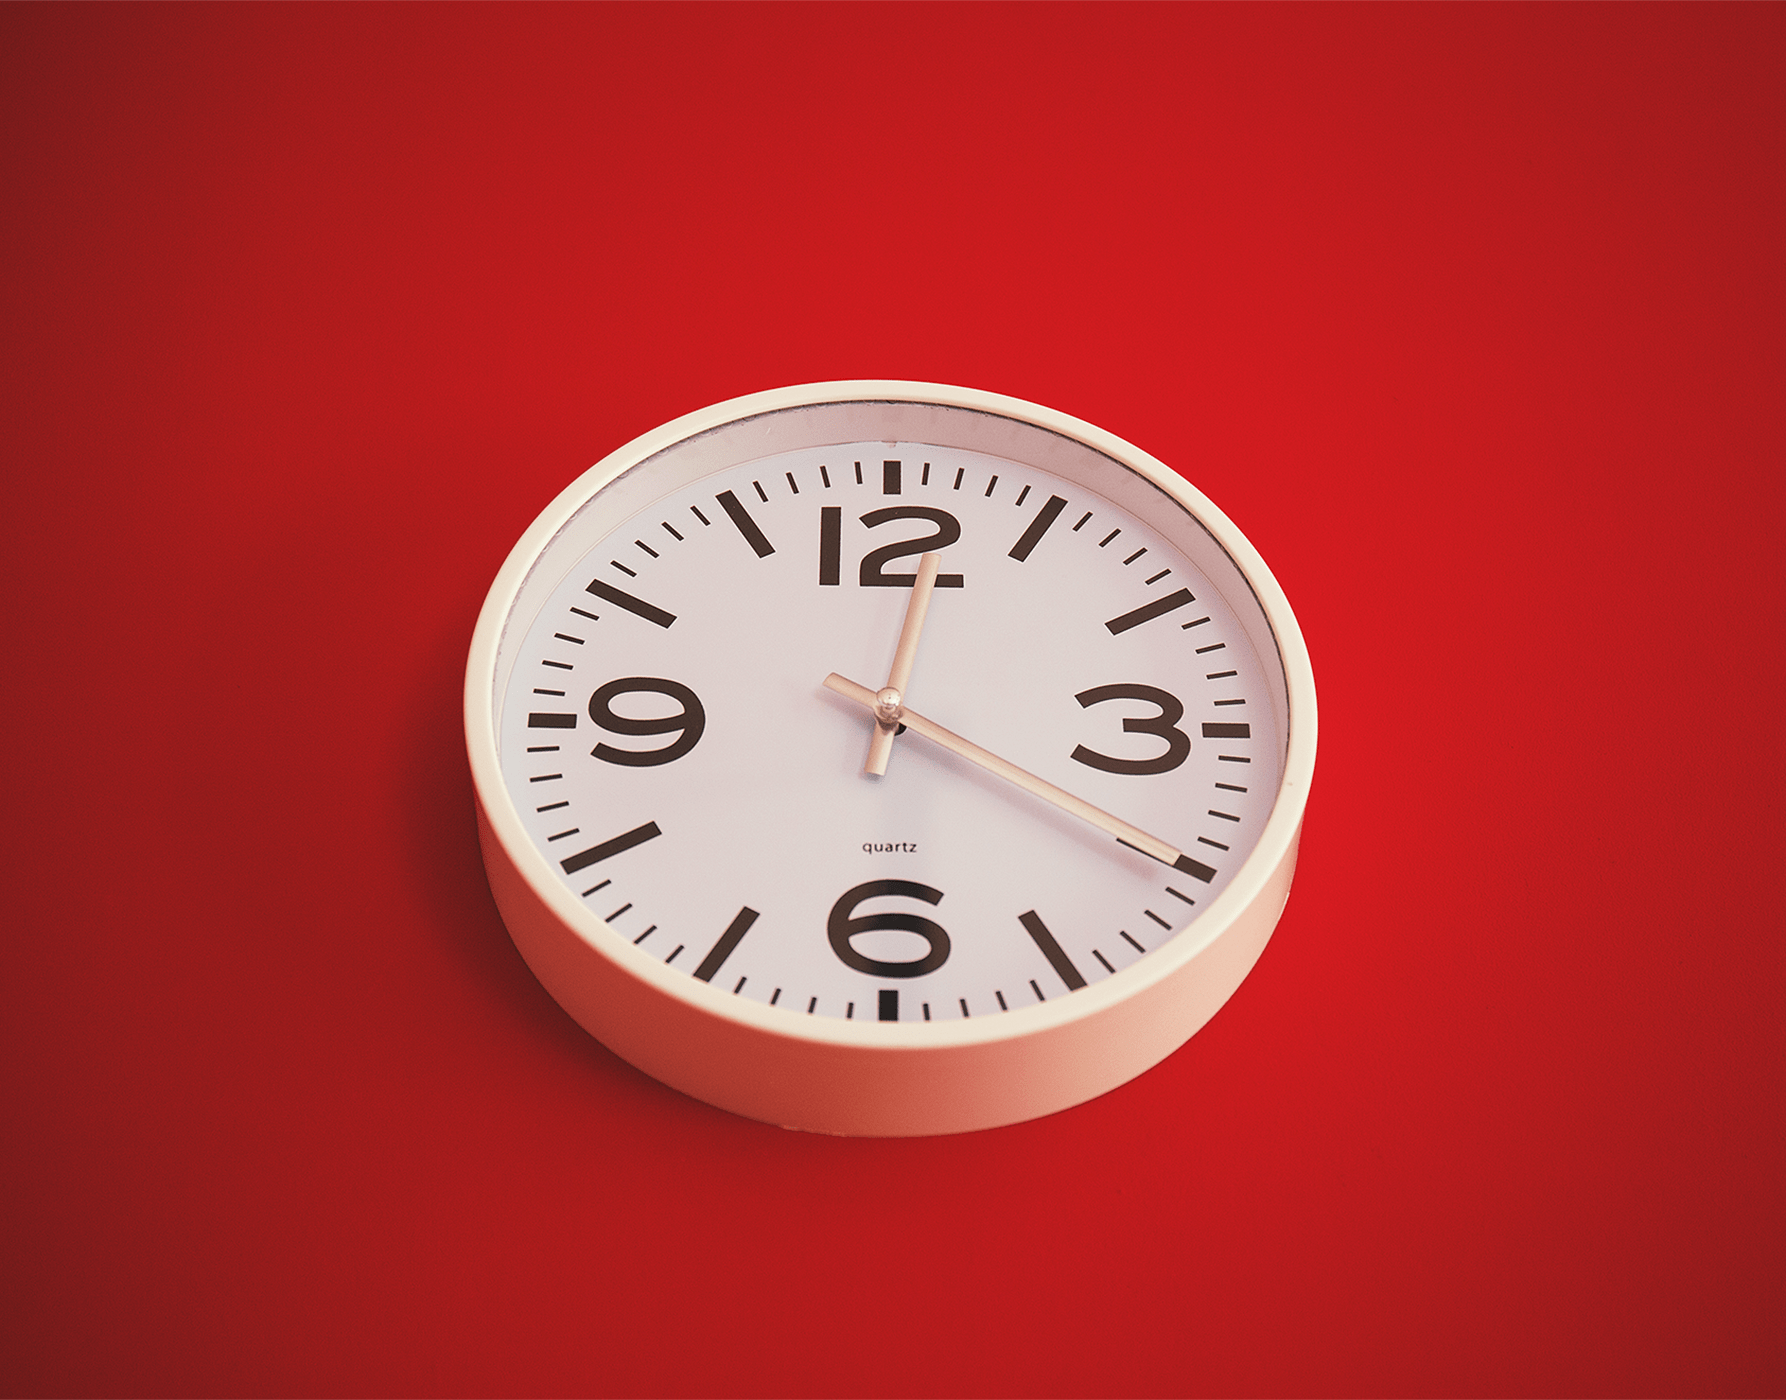 Wall clock on red background